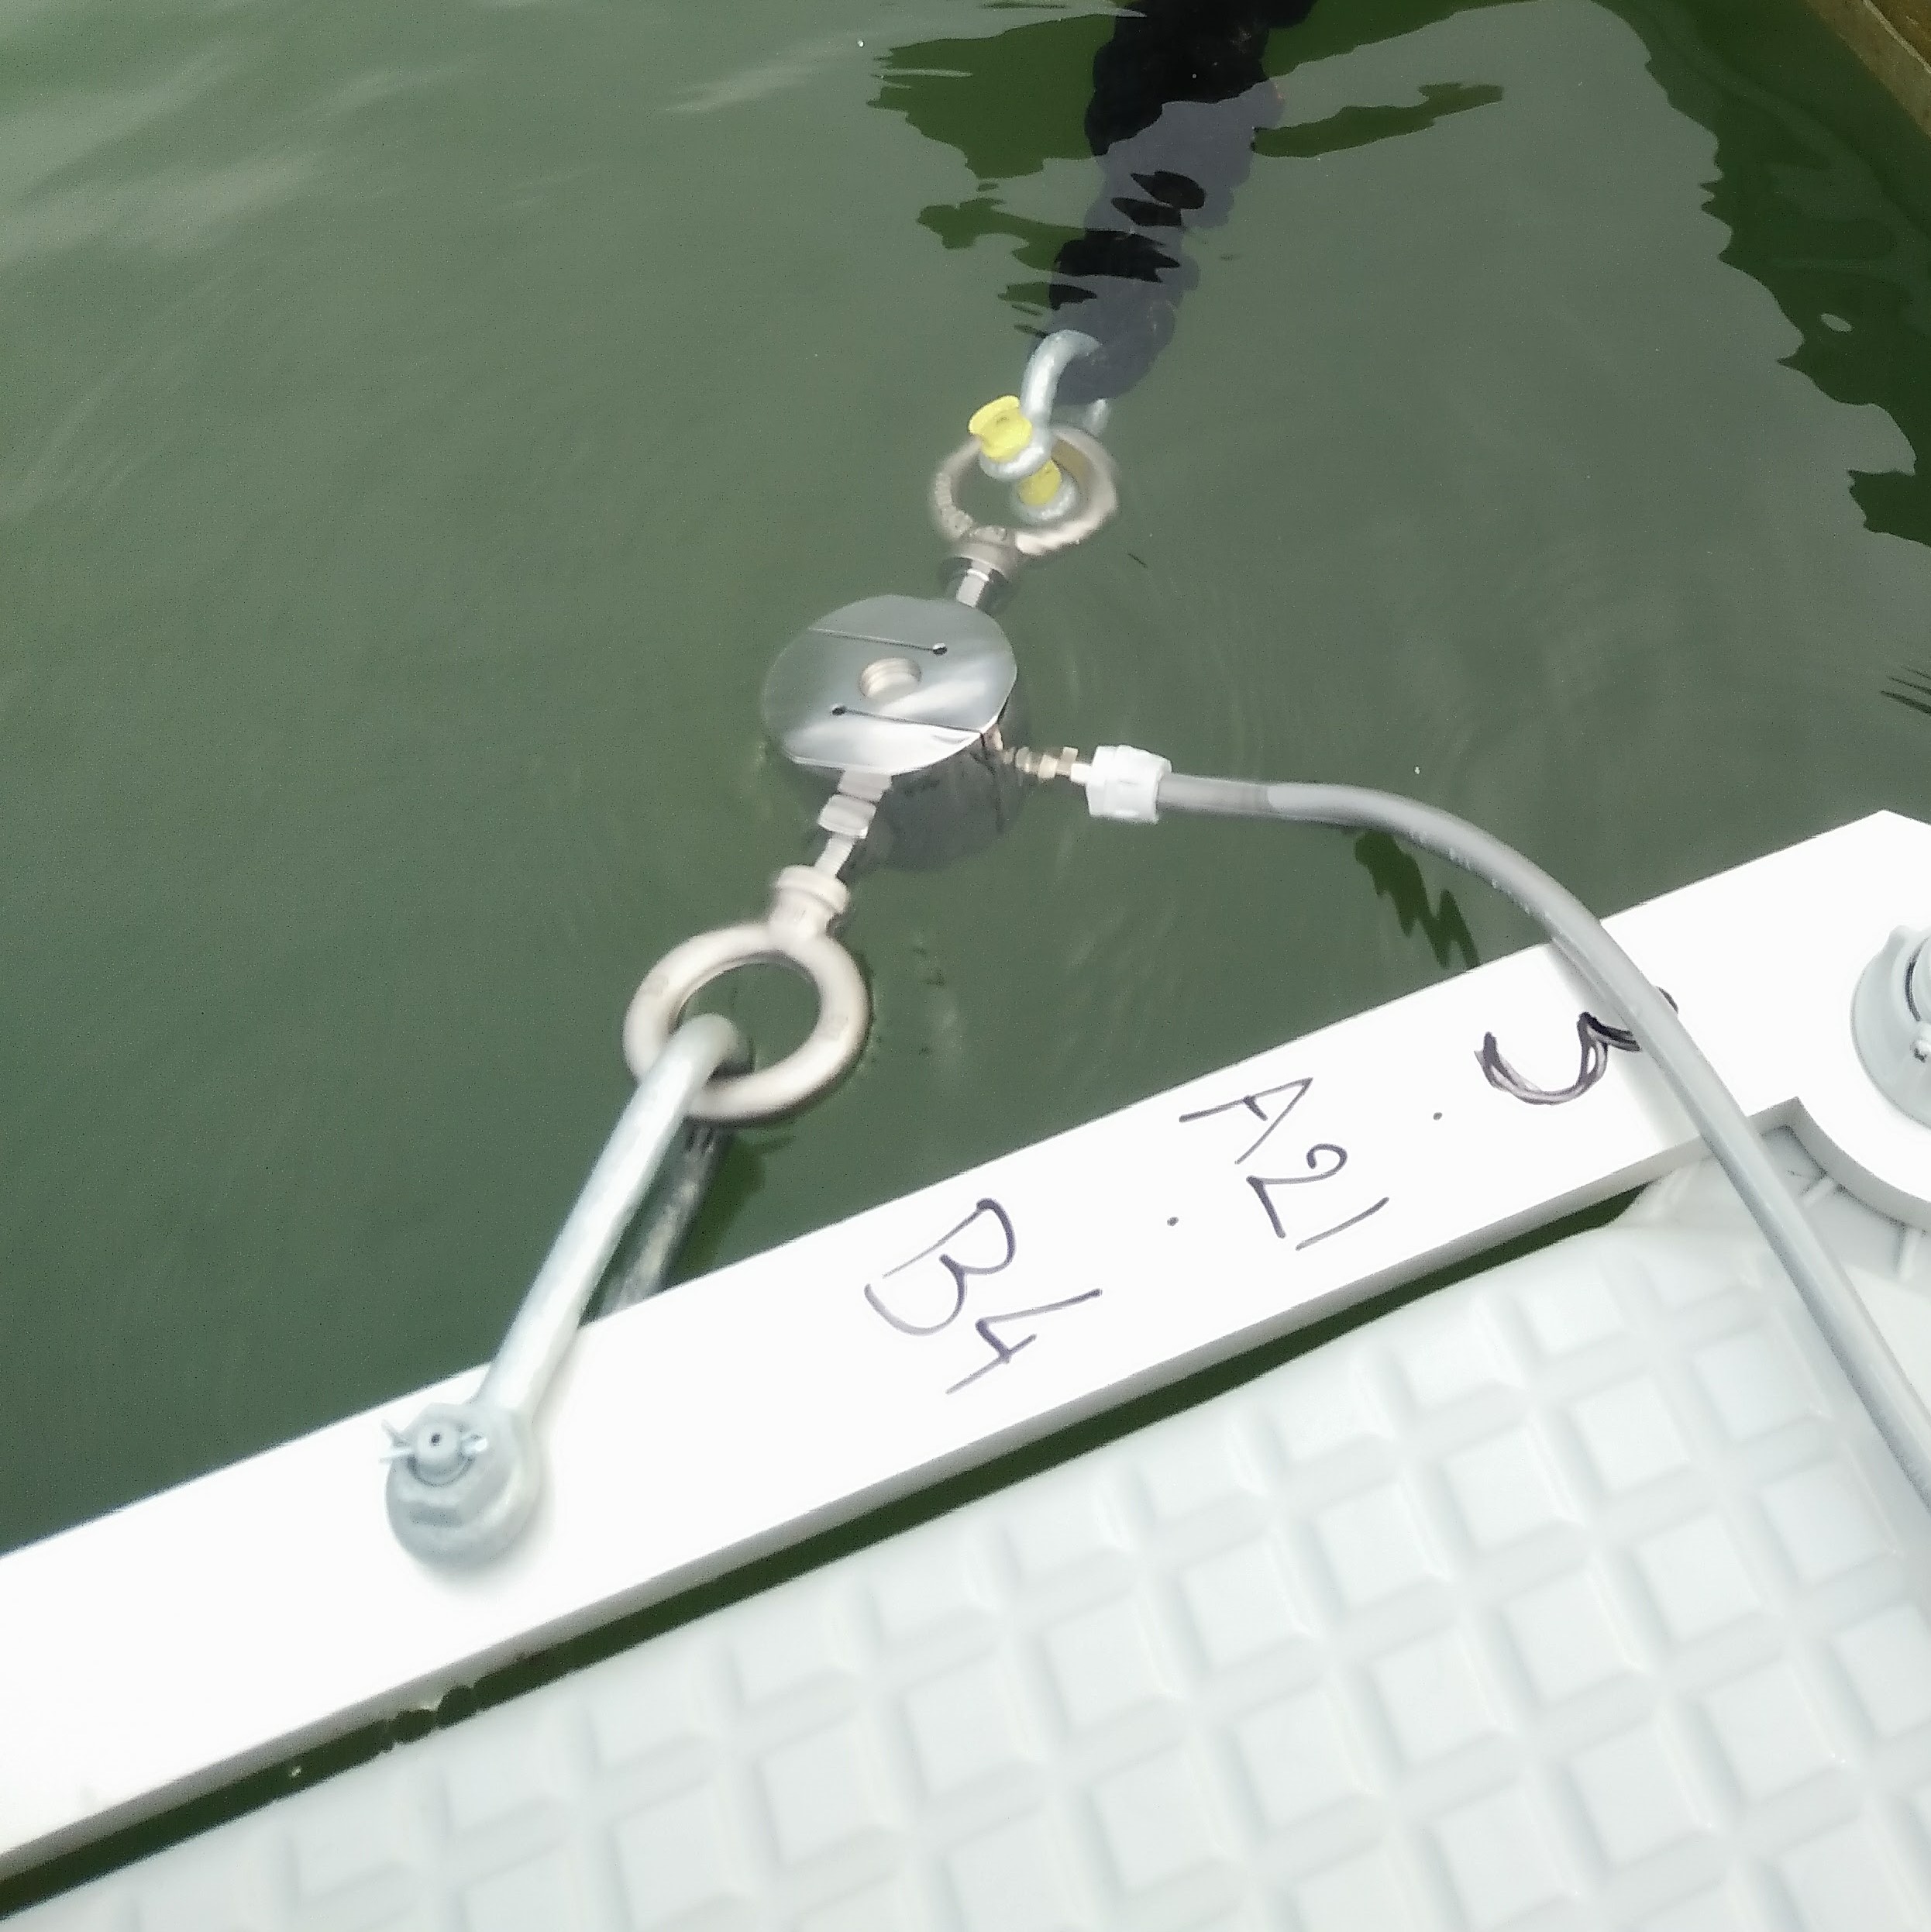 Anchoring system for floating solar